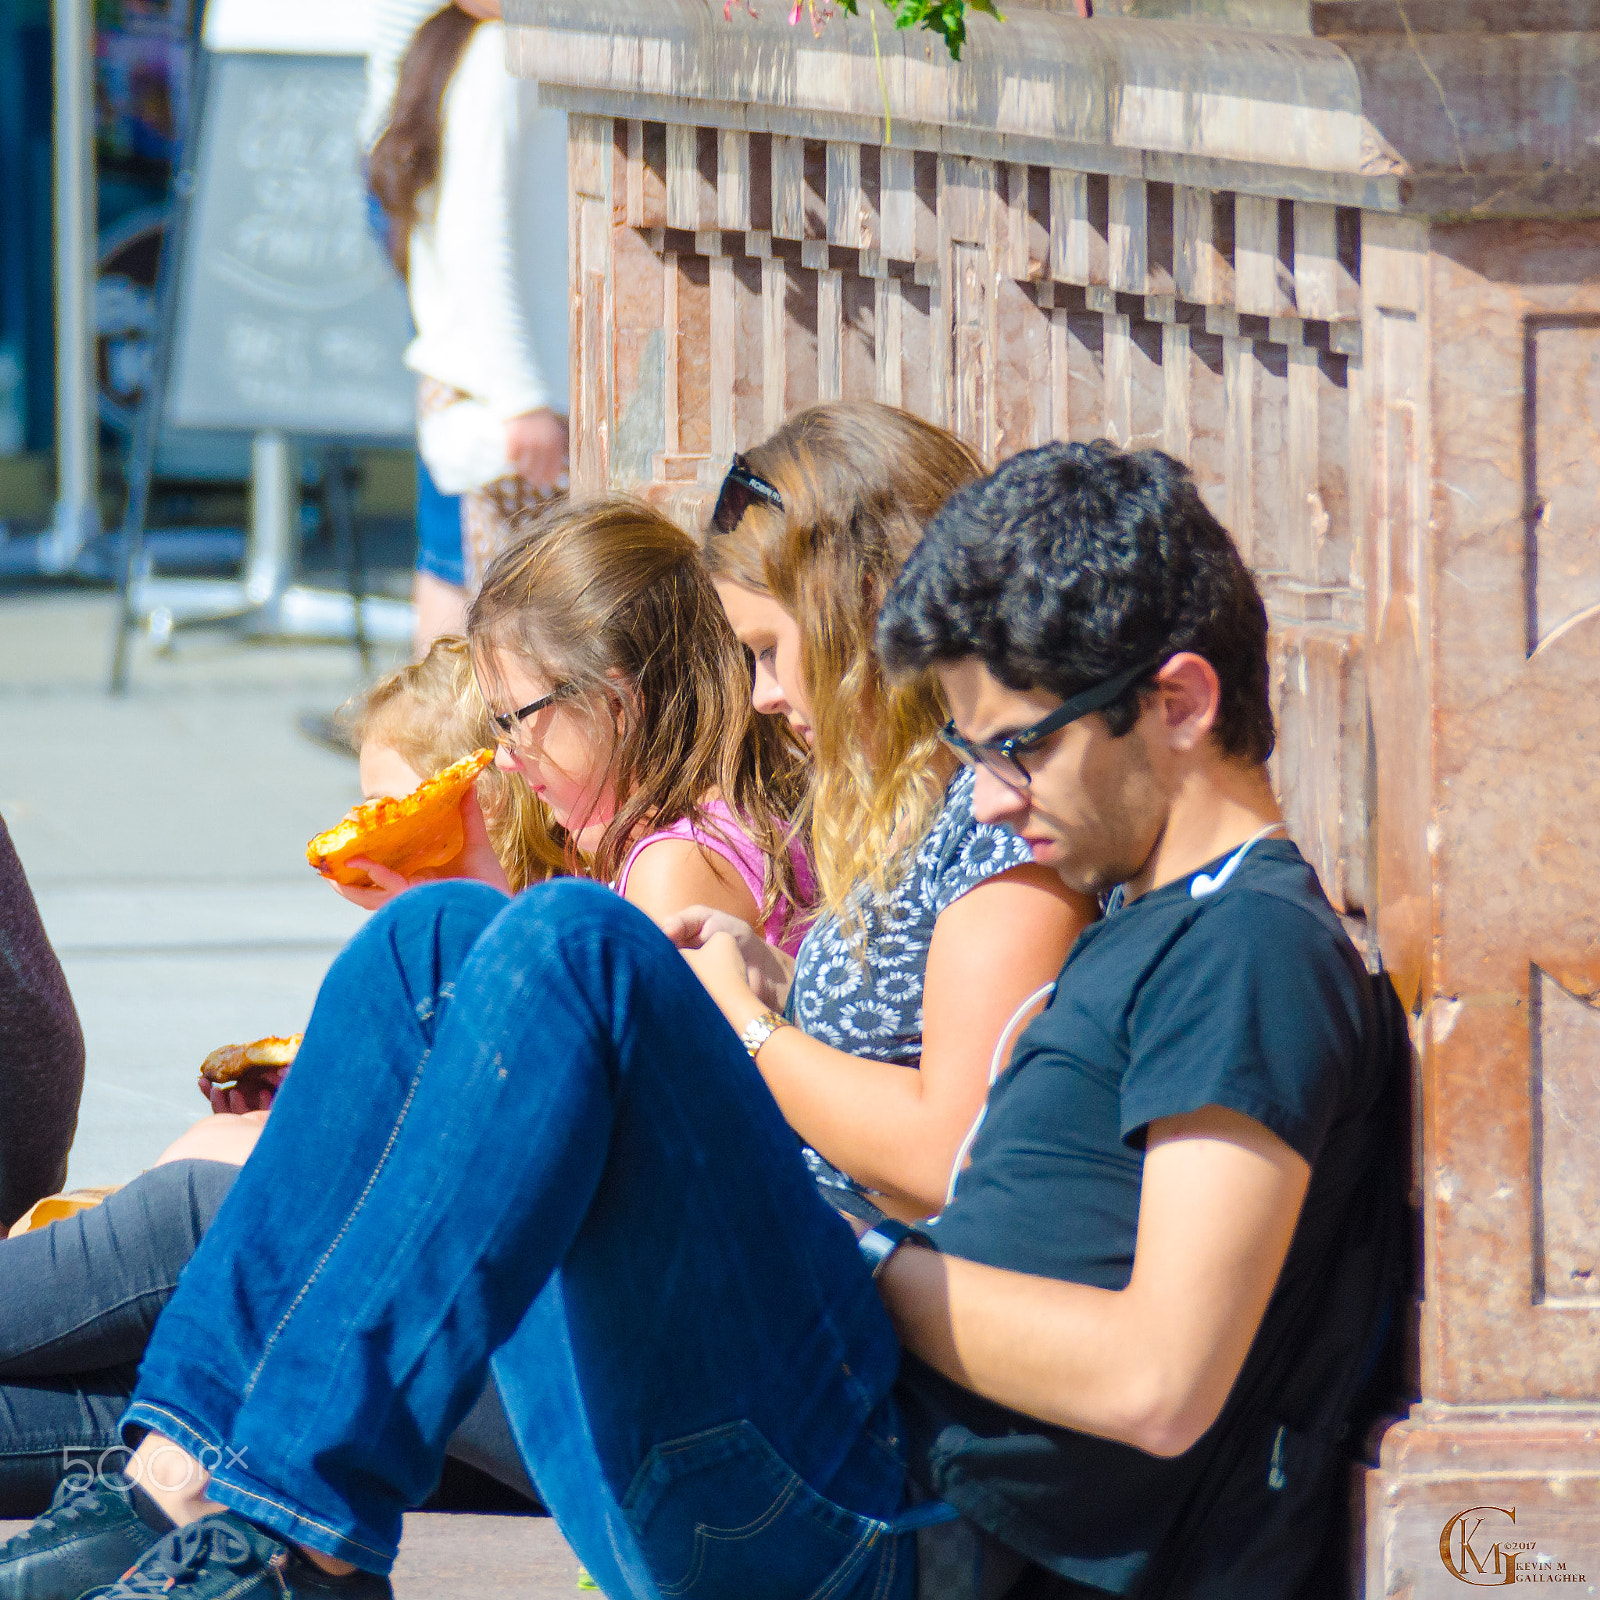 Nikon D7000 sample photo. Teens sitting under a statue photography